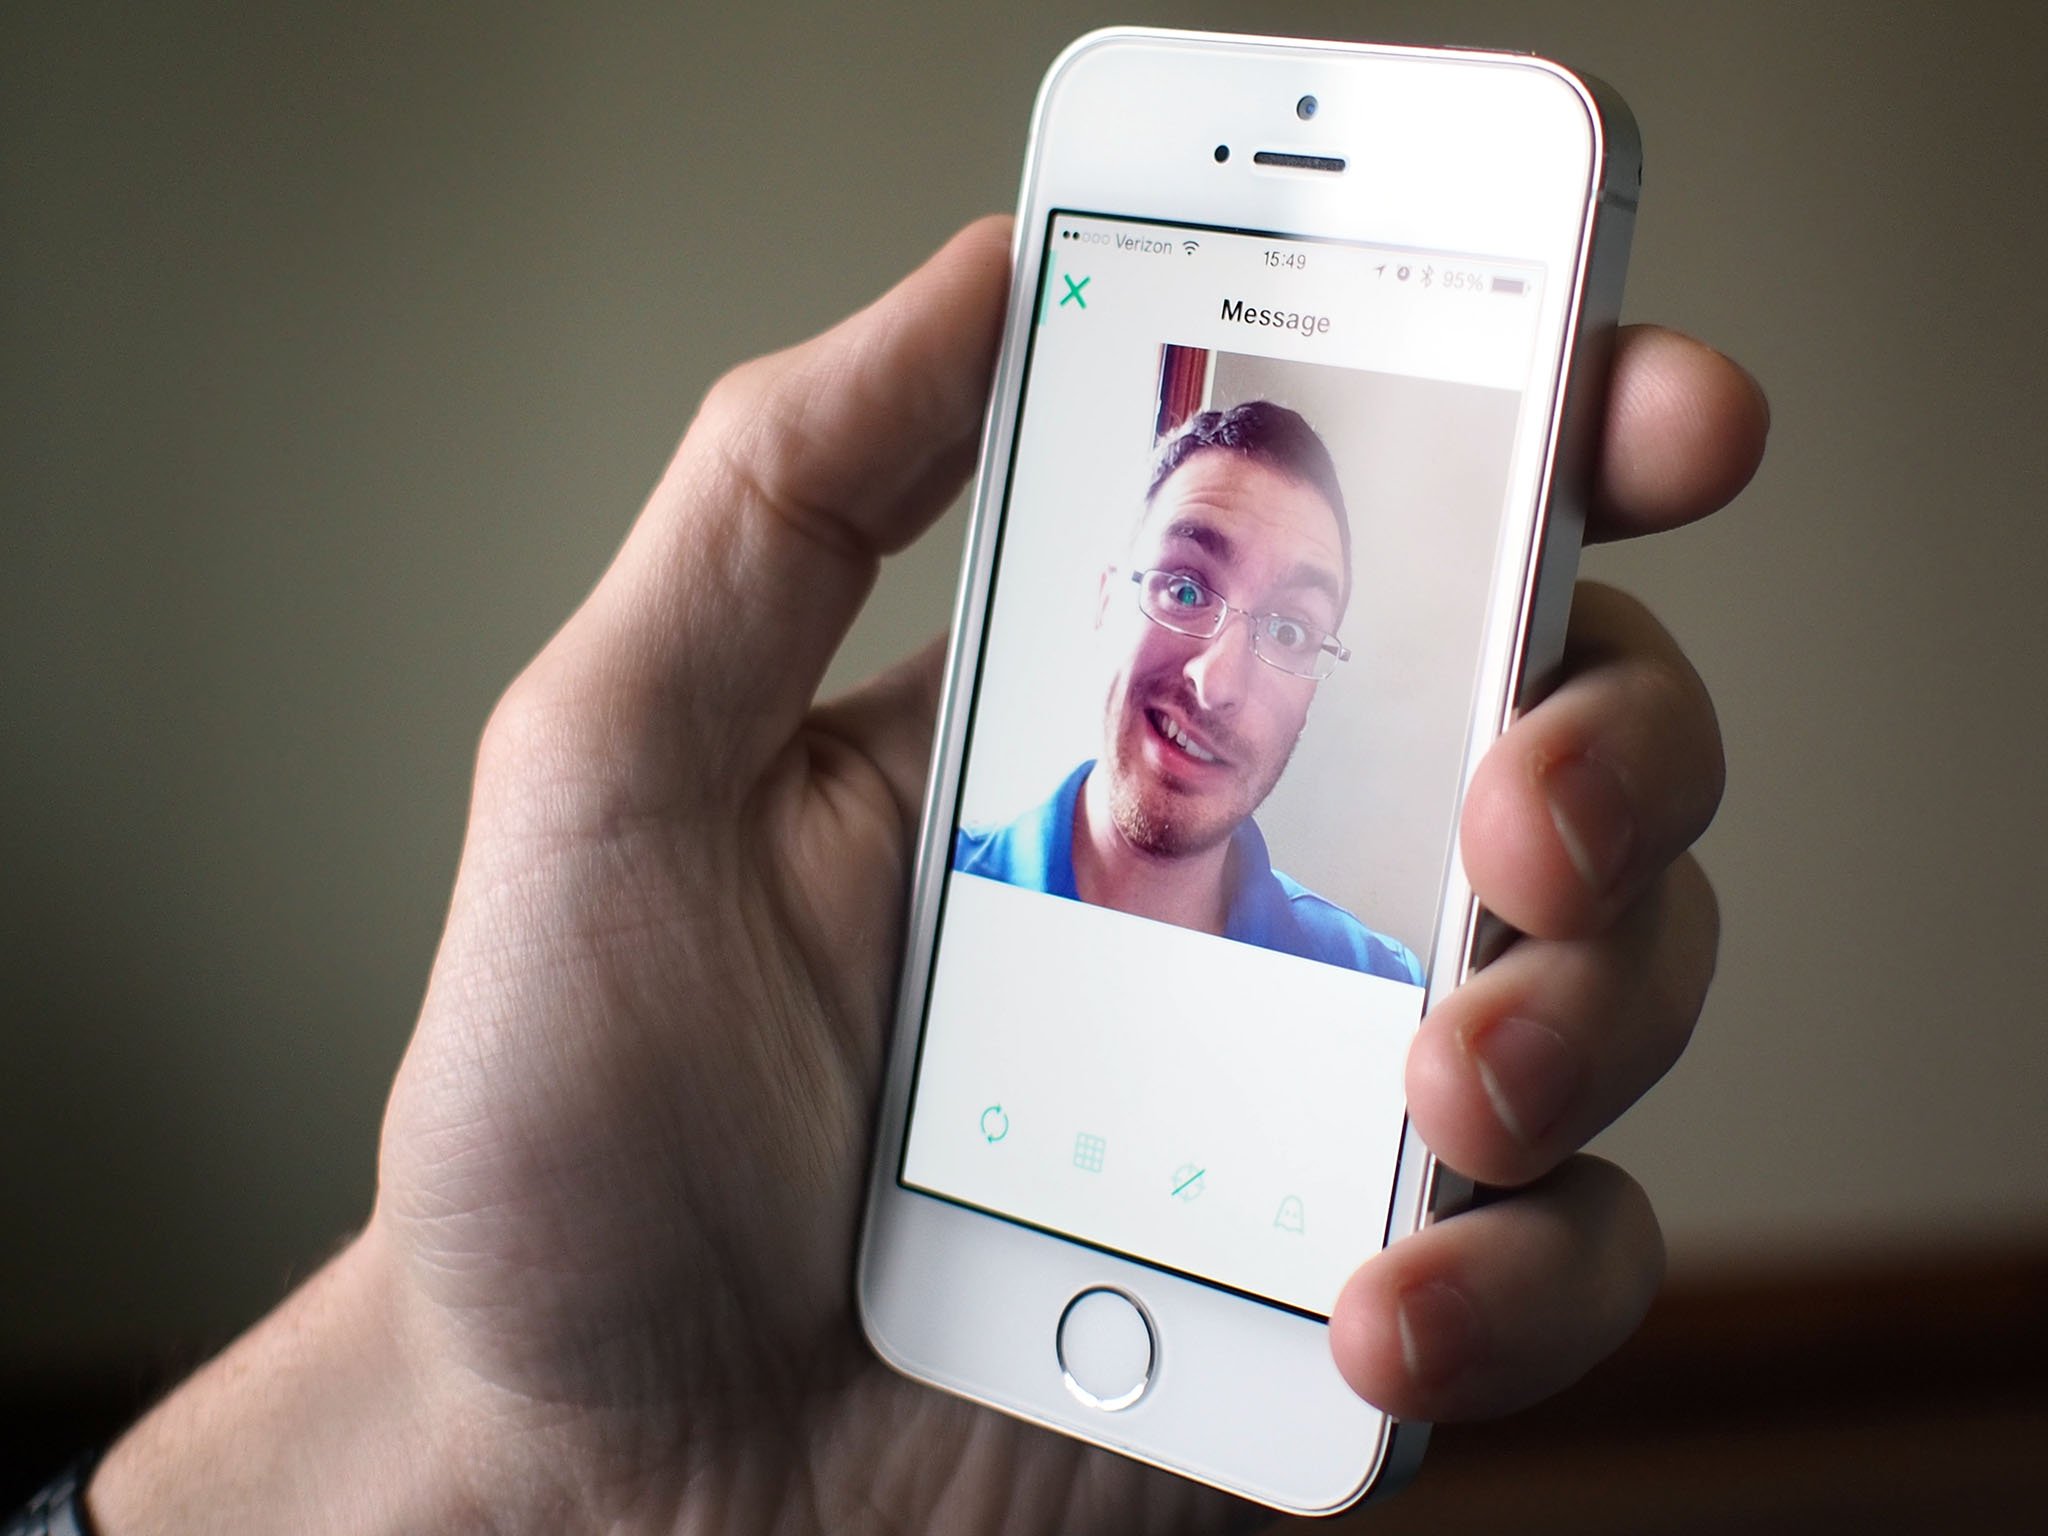 Send videos directly to your contacts with new Vine Messages